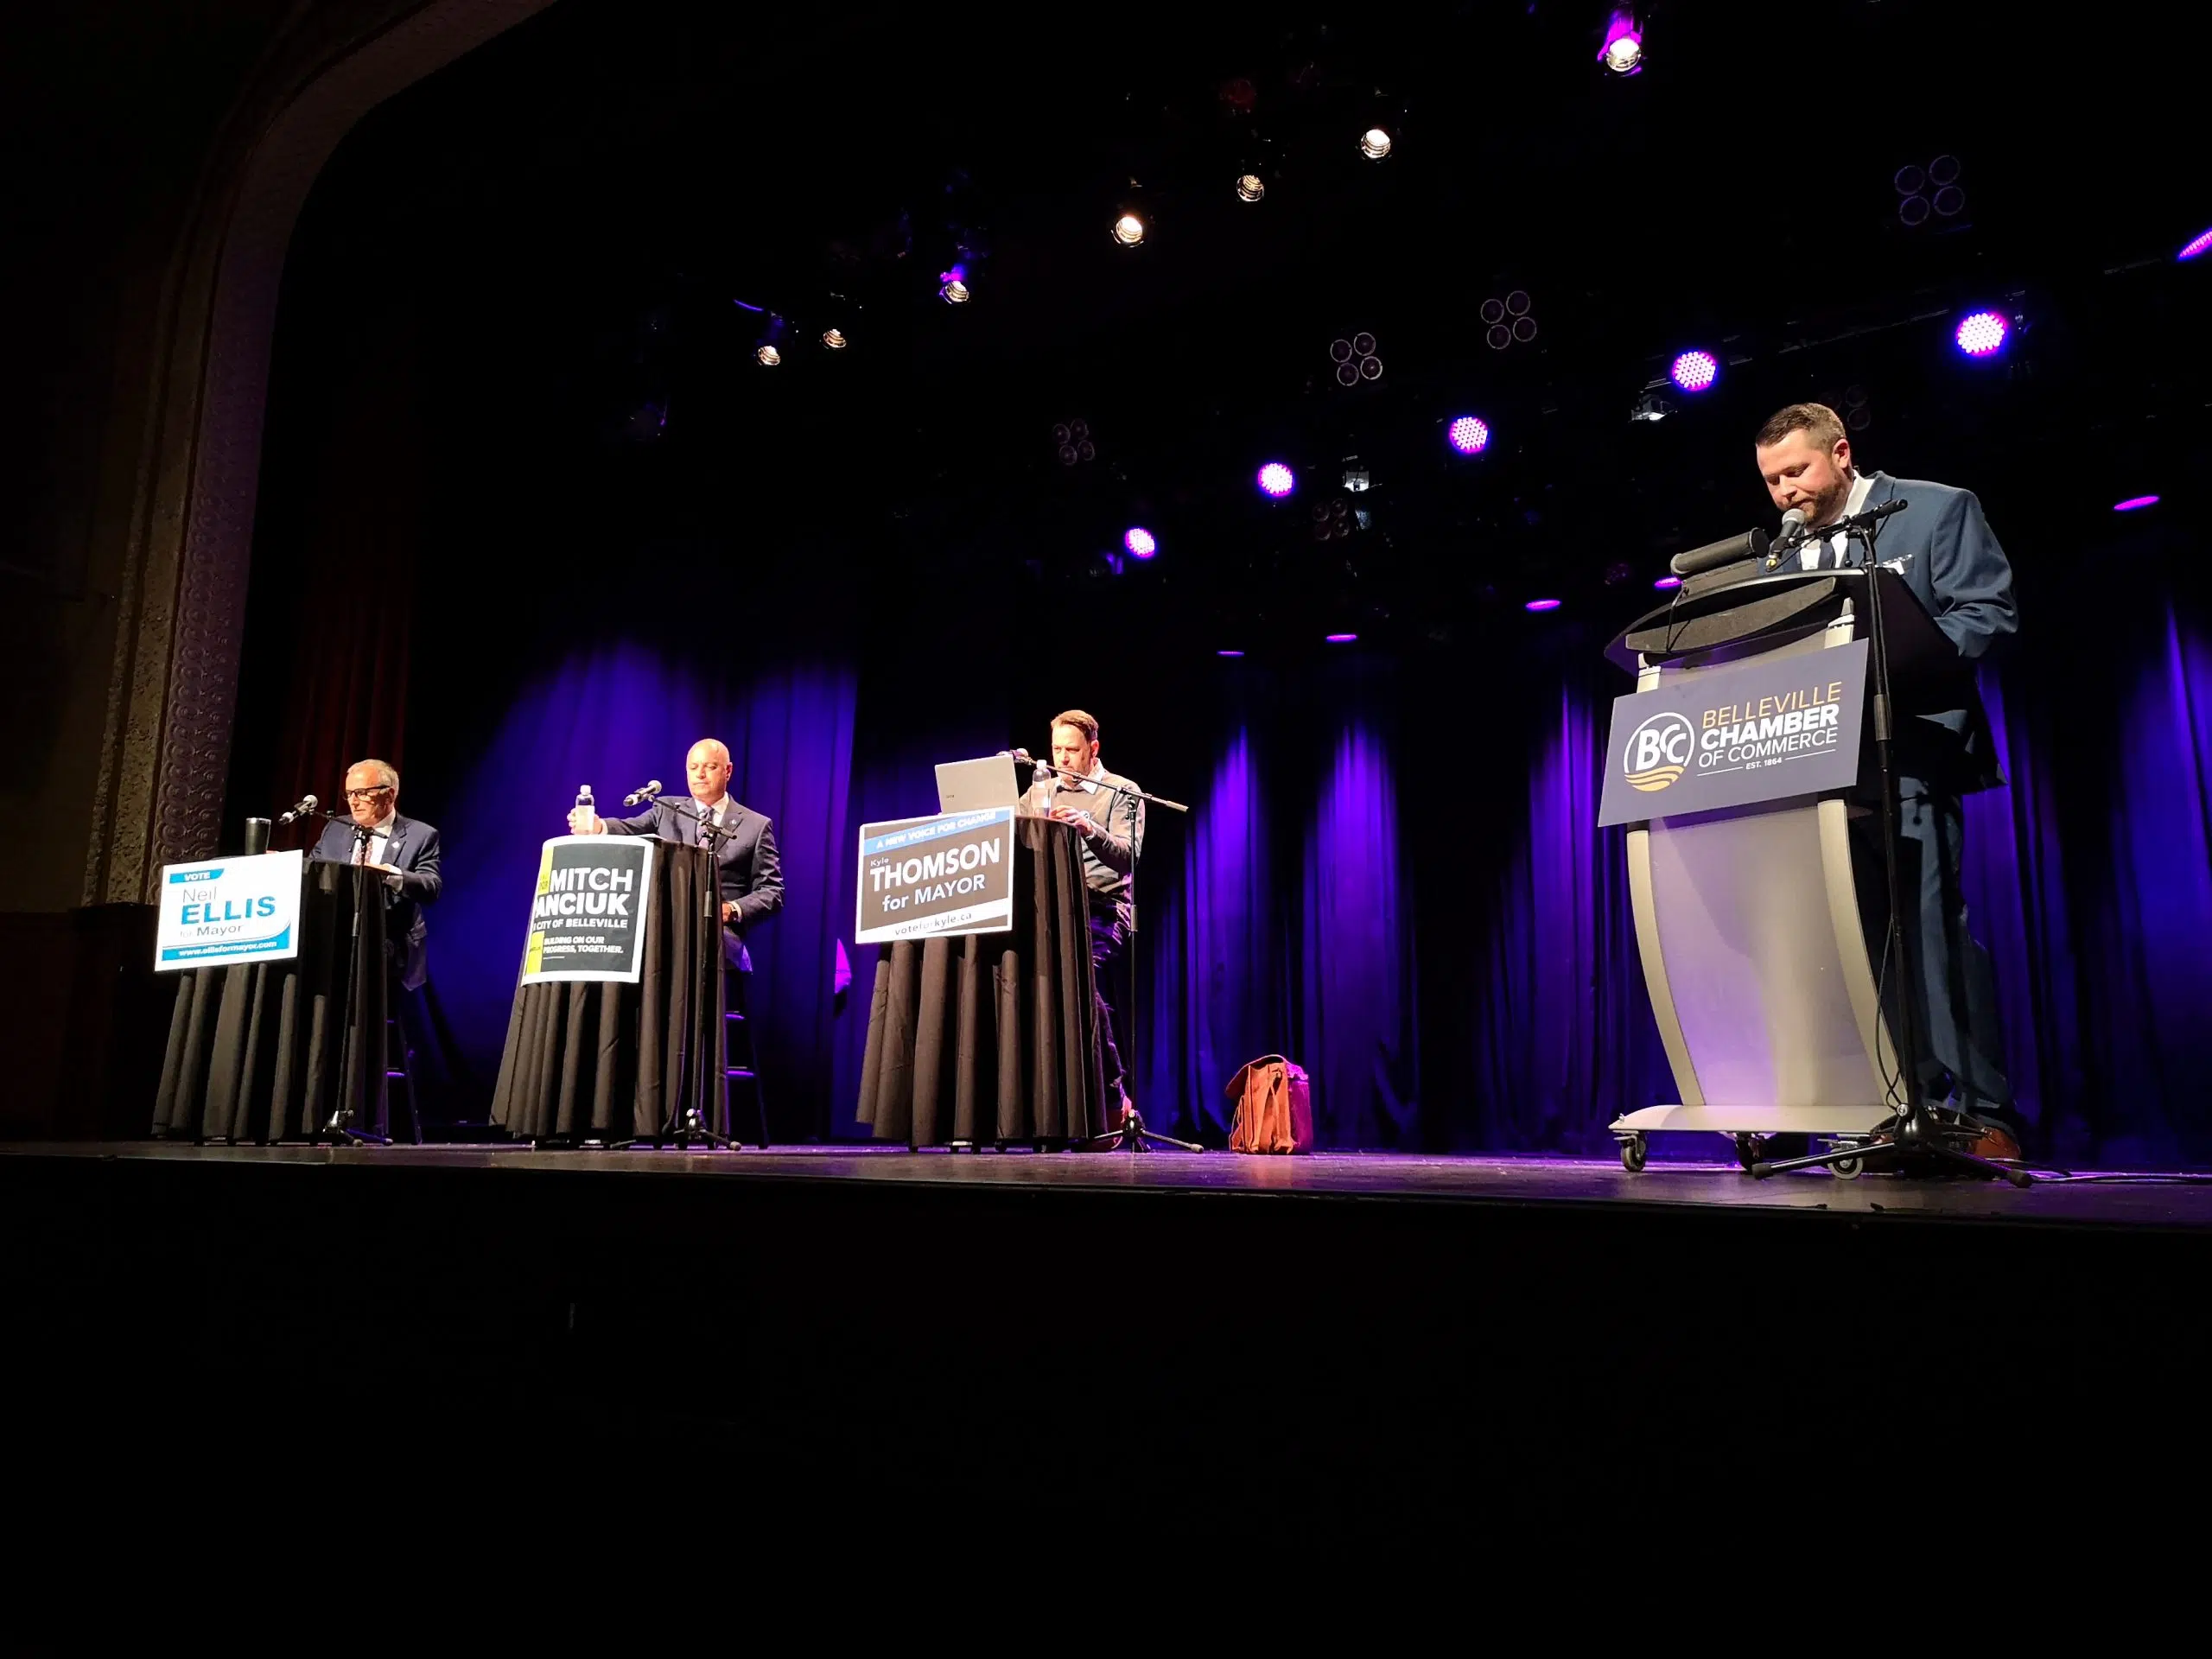 Belleville mayoral candidates debate integrity at the Empire Theater